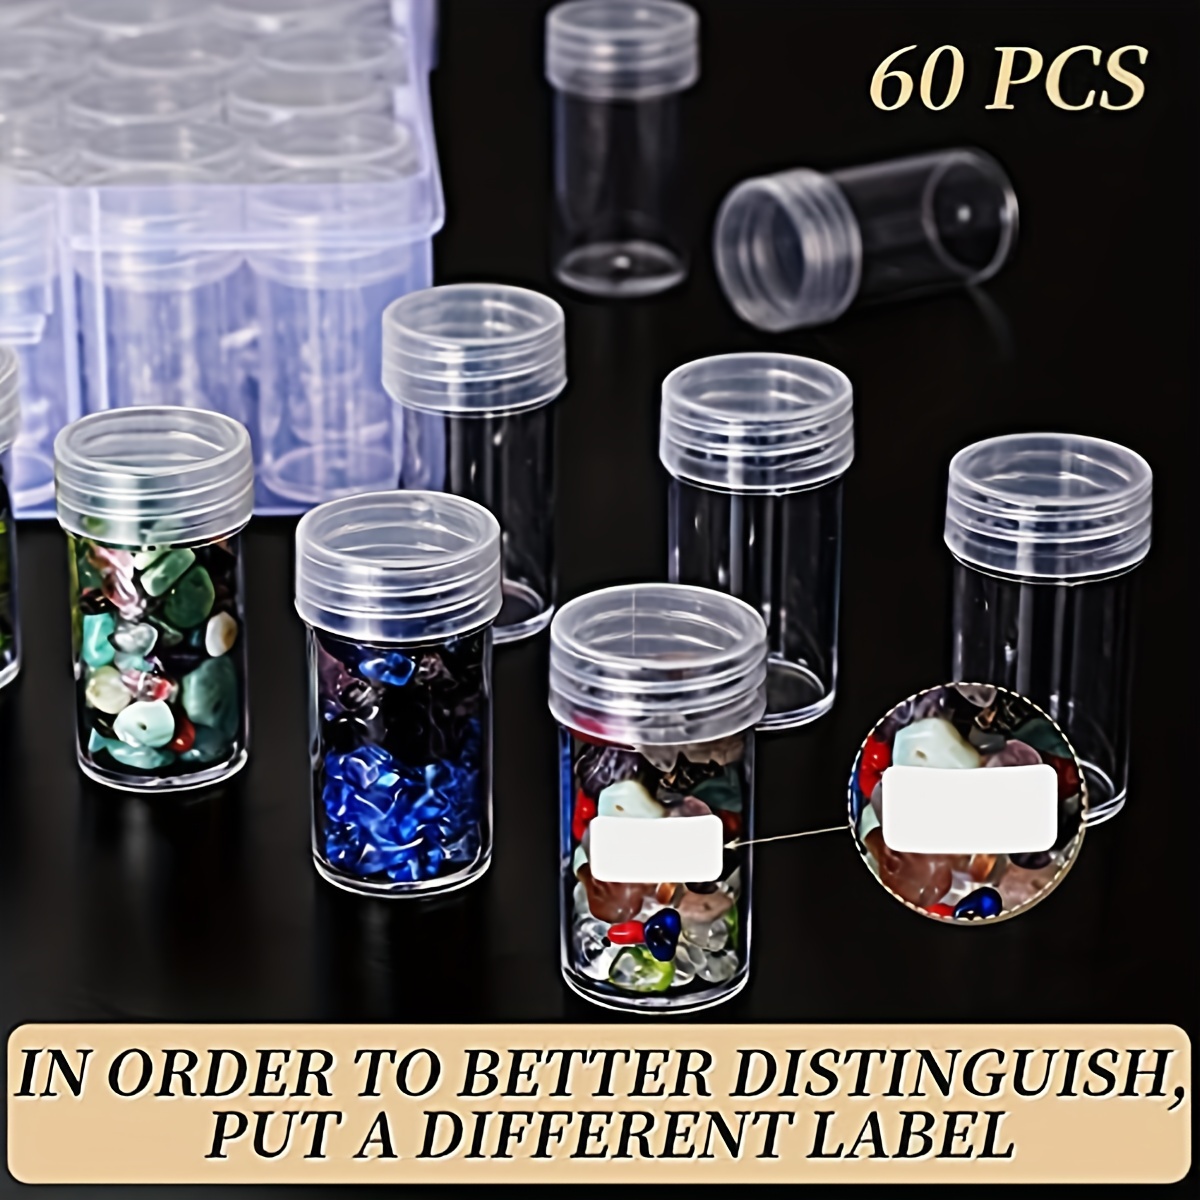 Clear Bead Storage Containers Small Parts Storage Diamond Painting  Accessory Box